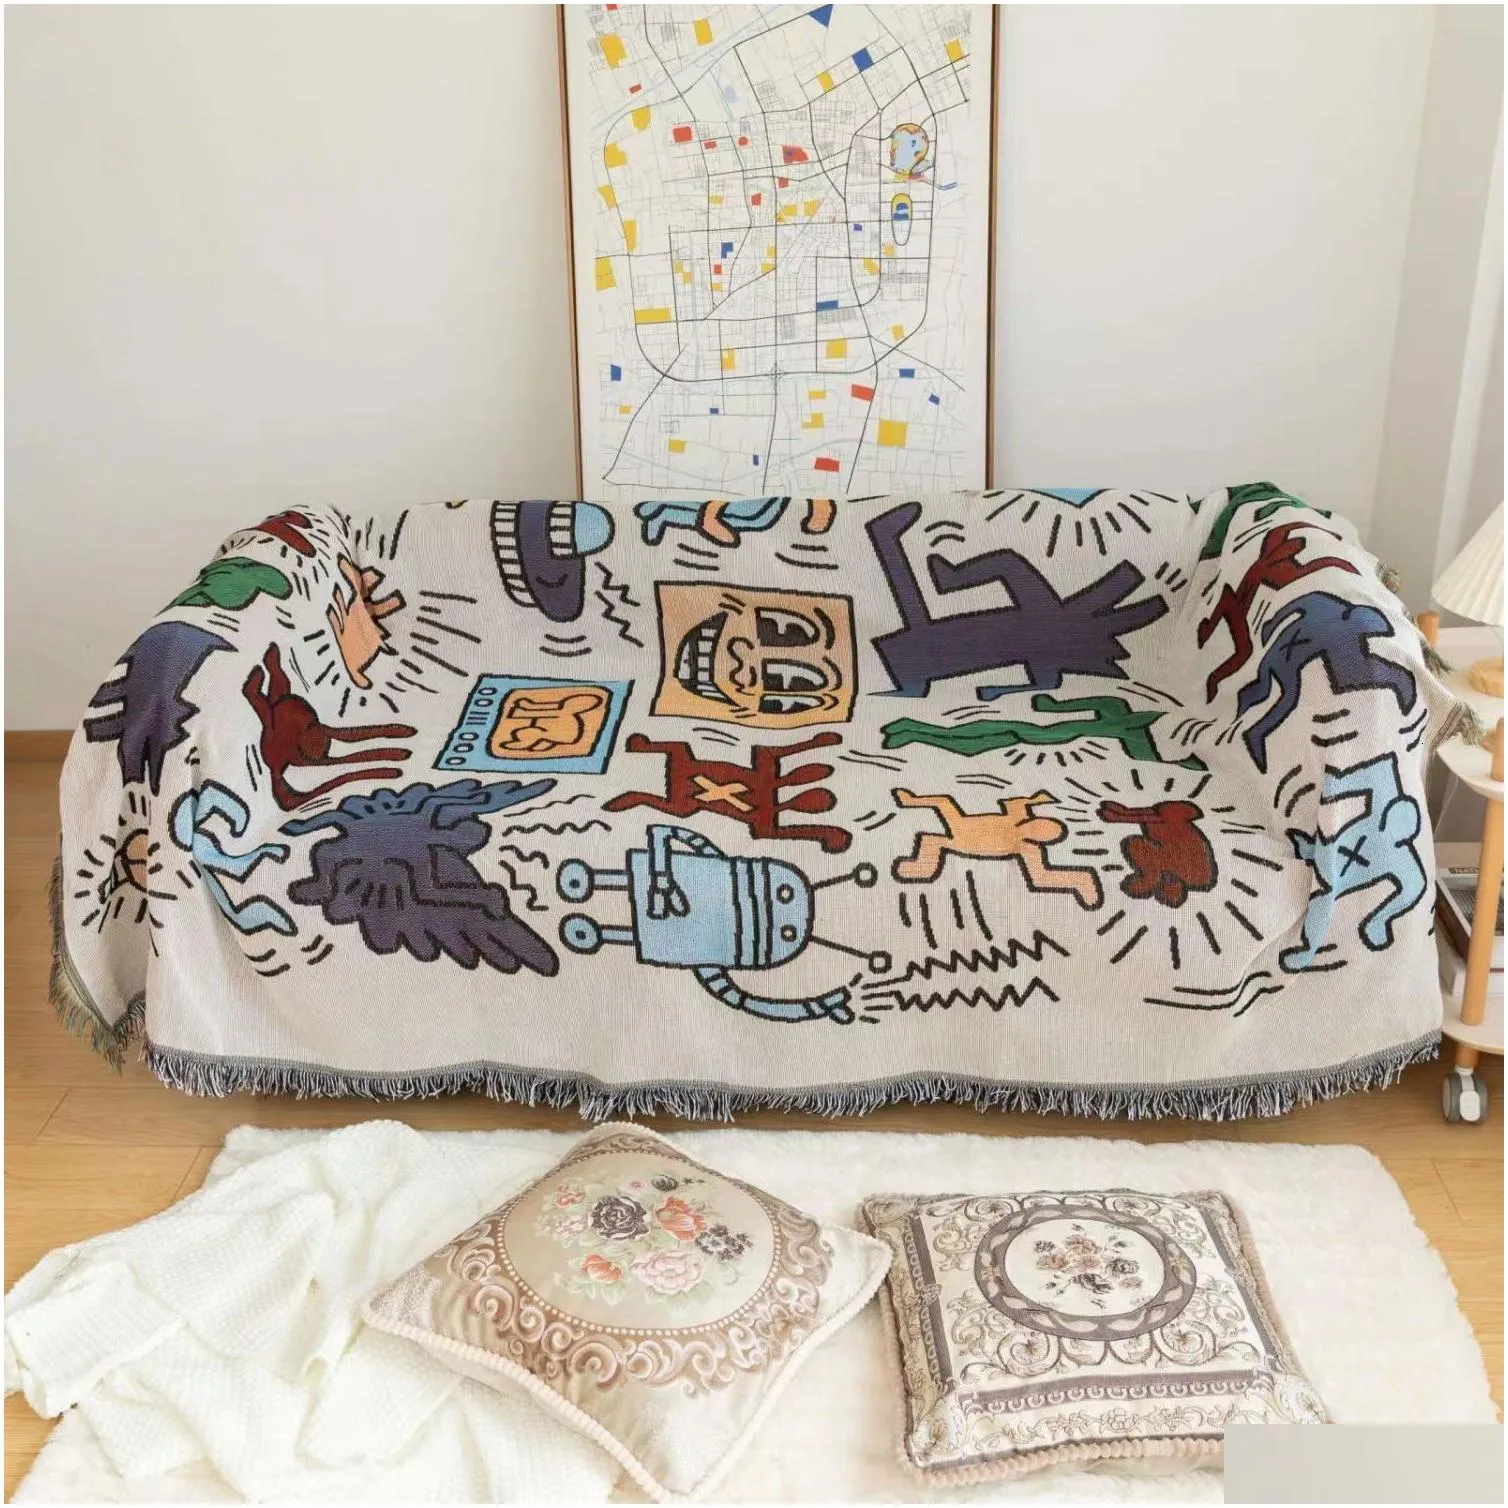 blankets textile city ins jigsaw puzzle throw blanket jacquard weave graffiti home decorative tassels tapestry outdoor camping mat